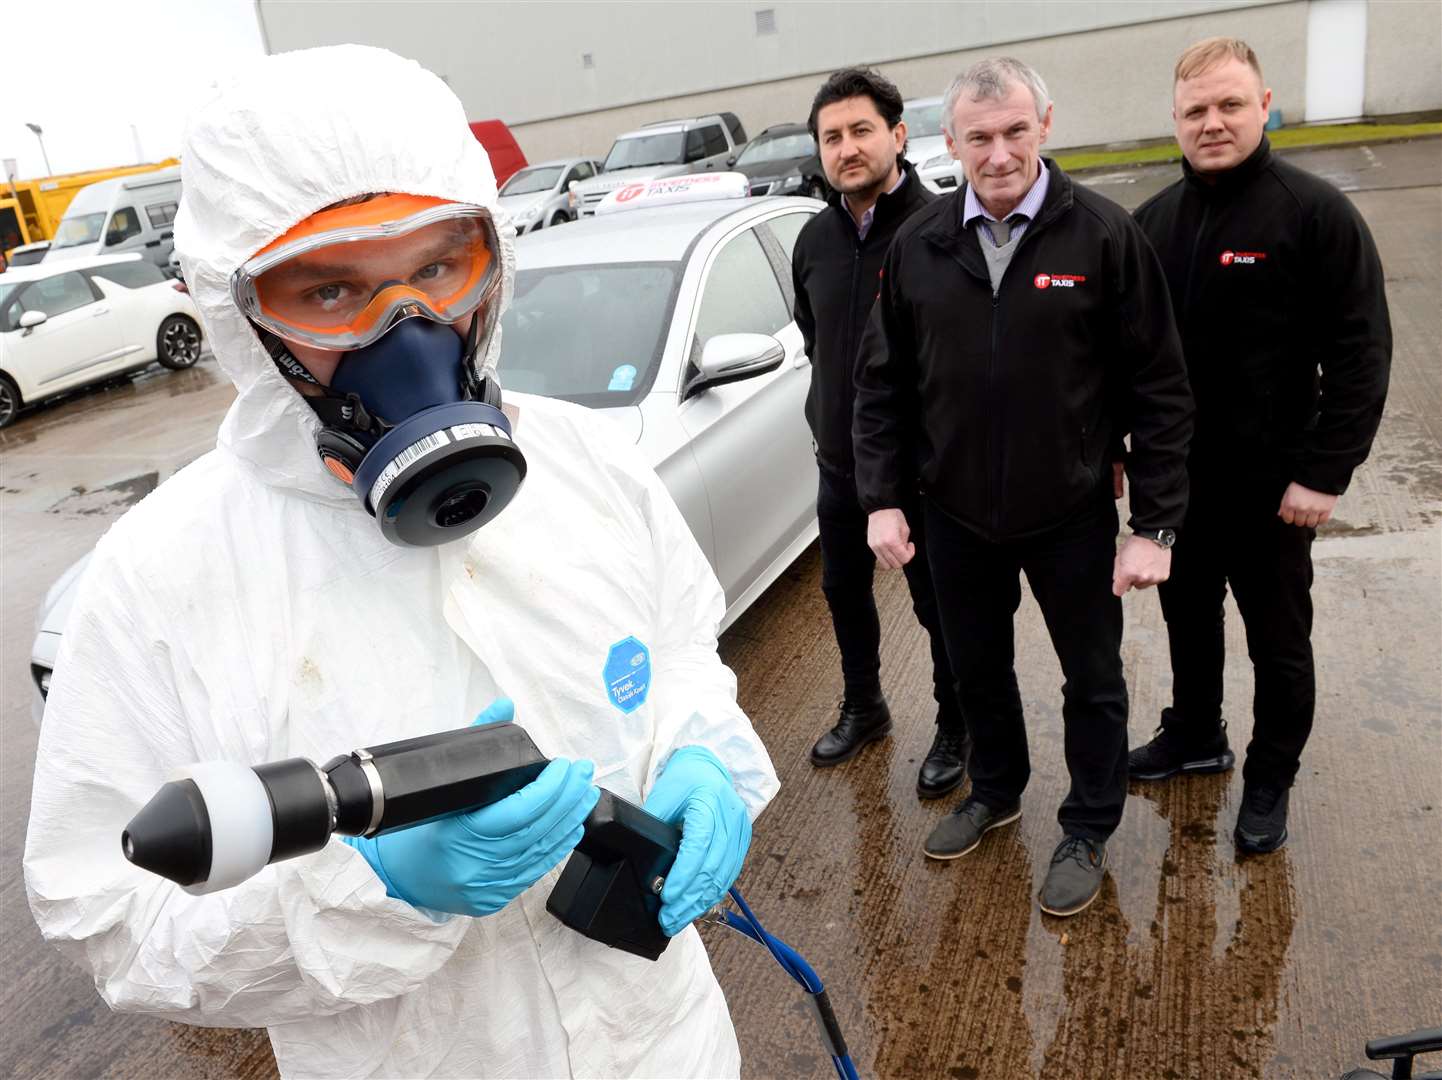 Inverness Taxis (IT) get disinfection and decontamination services to all vehicles and offices. From left, Zack Paterson of AMS Global with IT's Wojciech Kobialka, Gavin Johnston and Shaun Dougan. Picture: Gary Anthony